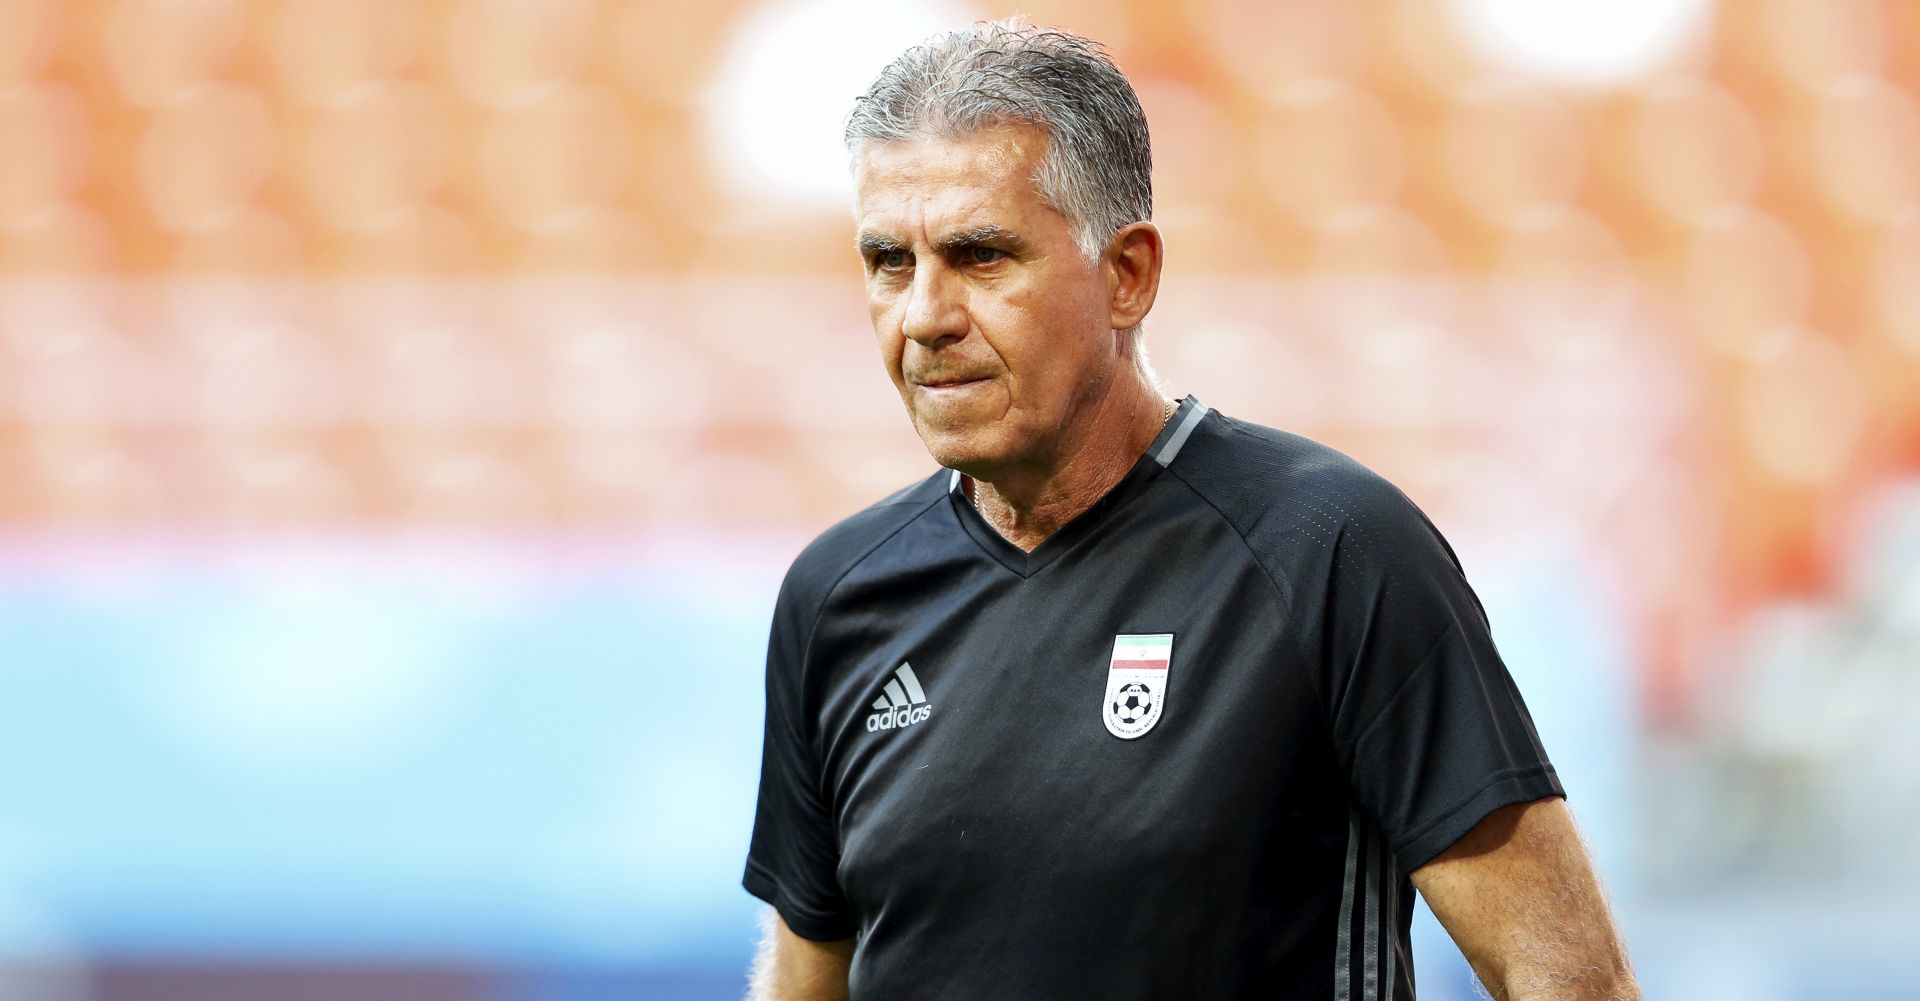 epa06836753 Iran's head coach Carlos Queiroz leads his team's training session in Saransk, Russia, 24 June 2018. Iran will face Portugal in the FIFA World Cup 2018 group B preliminary round soccer match on 25 June 2018.  EPA/RUNGROJ YONGRIT